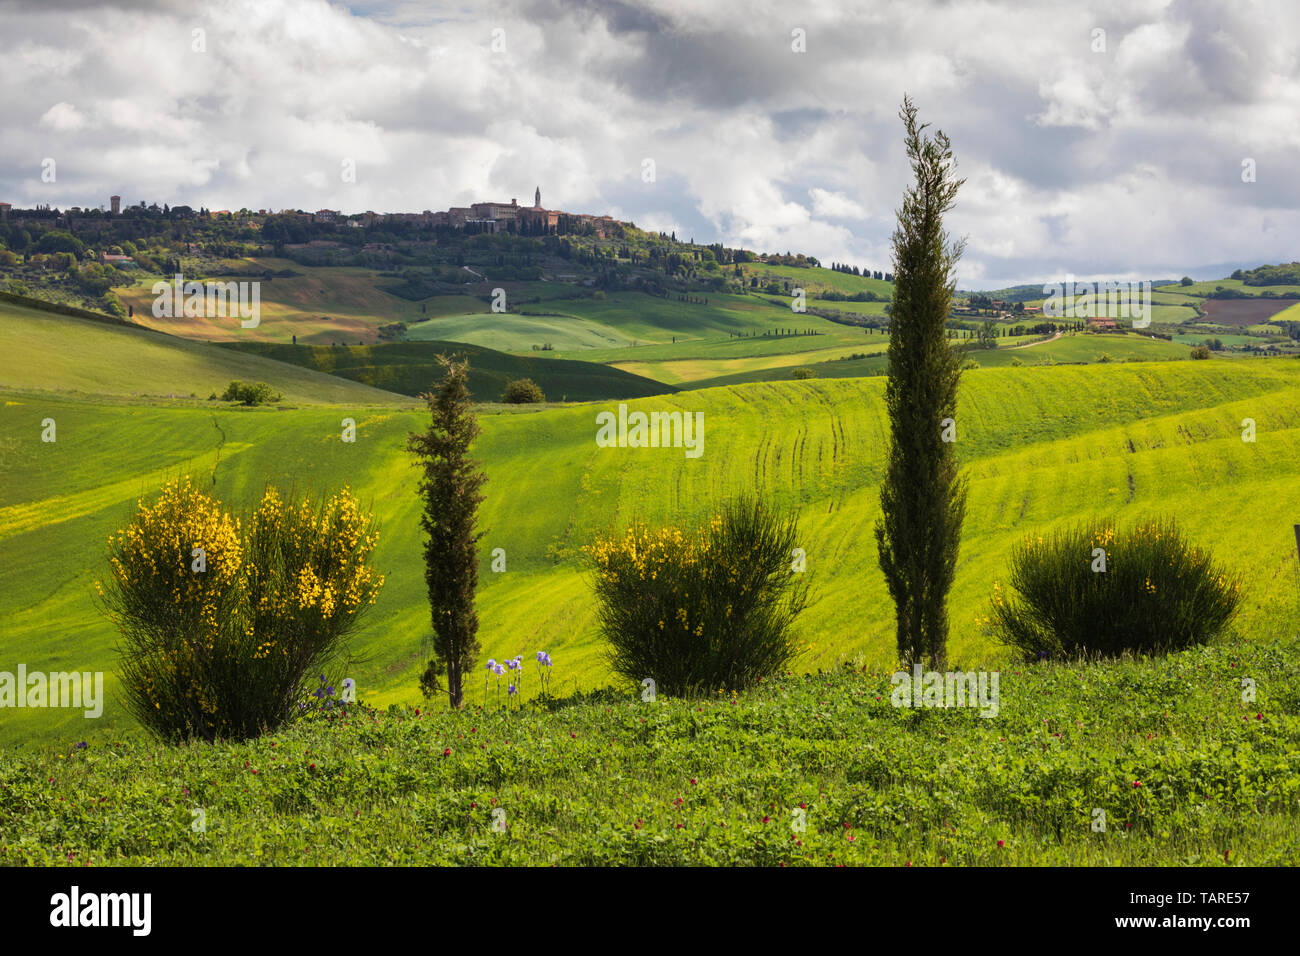 Hill town of Pienza viewed through cypress trees with Tuscan landscape, Pienza, Siena Province, Tuscany, Italy, Europe Stock Photo